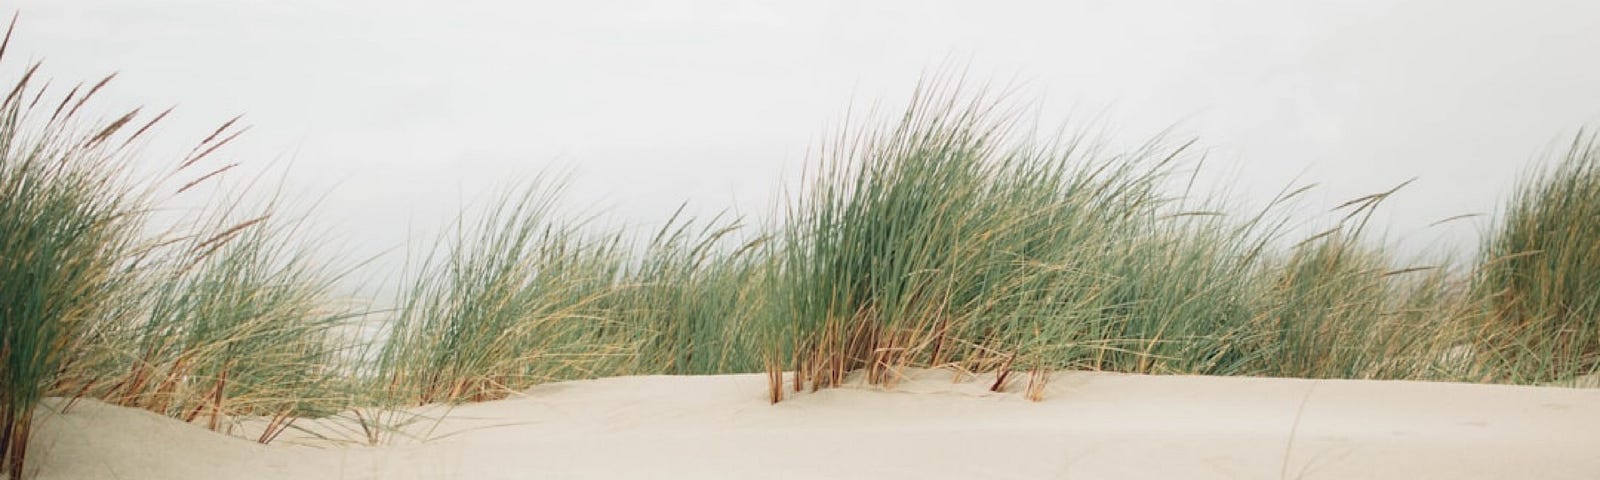 Sand dunes with beach grasses, gently bent in the breeze, growing on top.